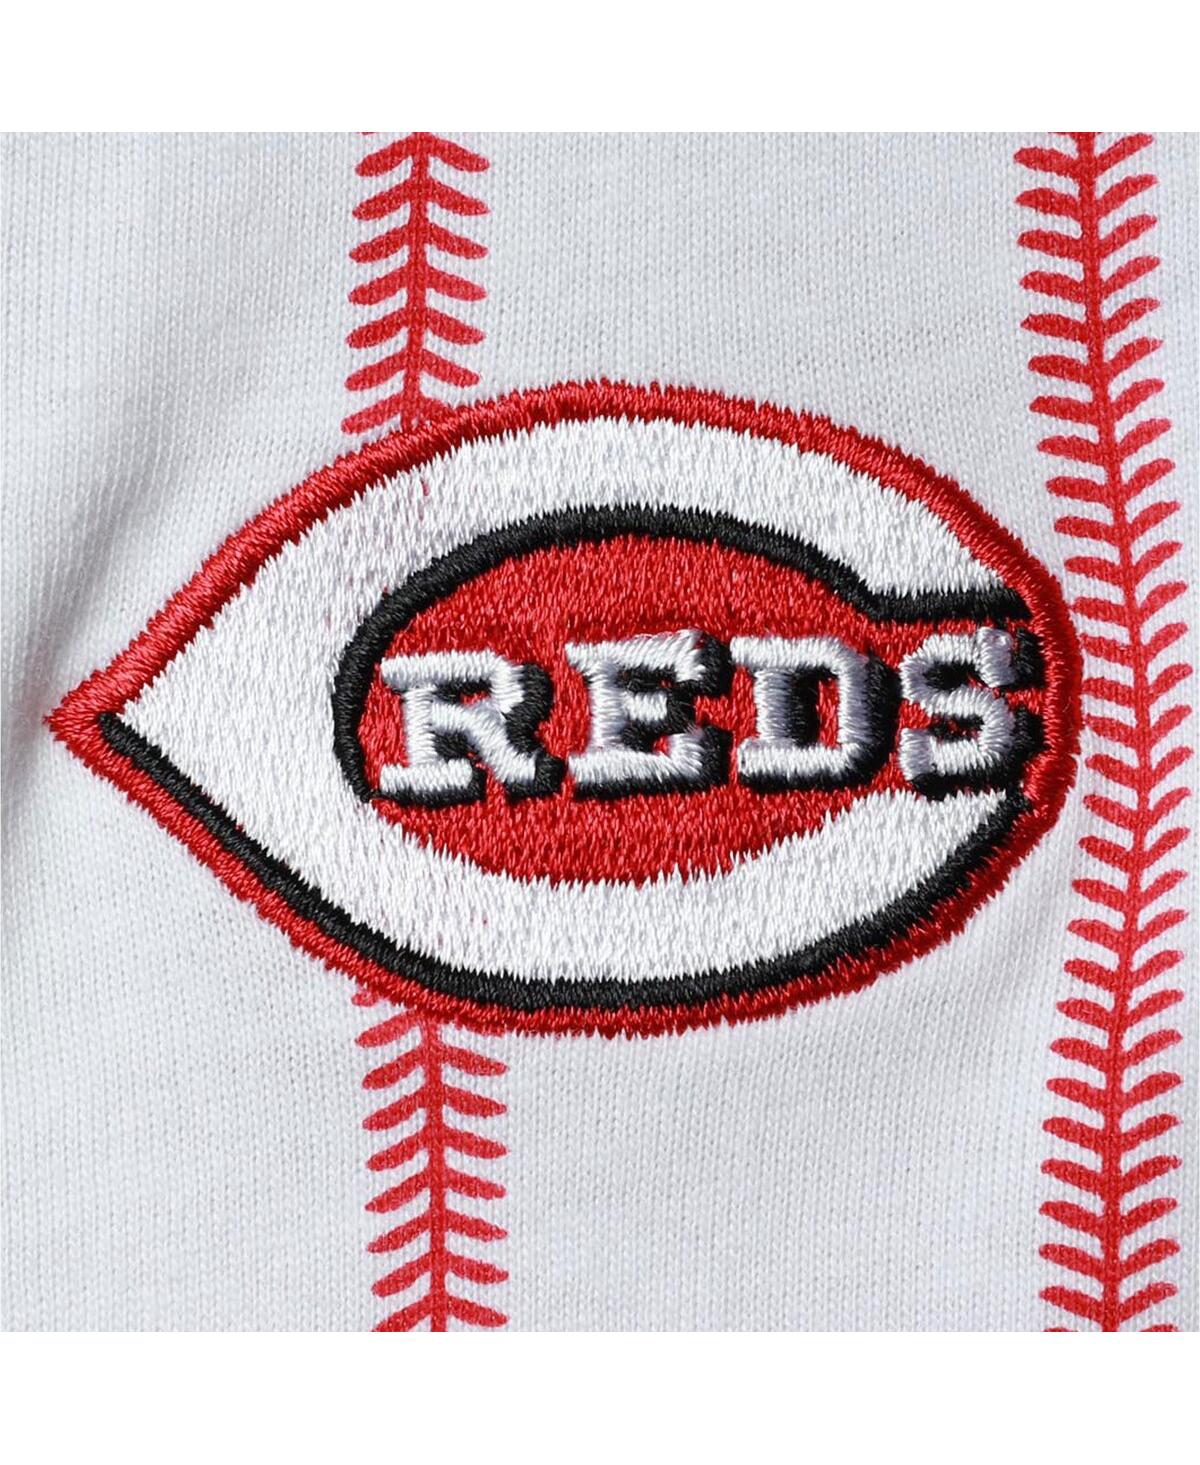 Shop Outerstuff Infant Boys And Girls White Cincinnati Reds Pinstripe Power Hitter Coverall